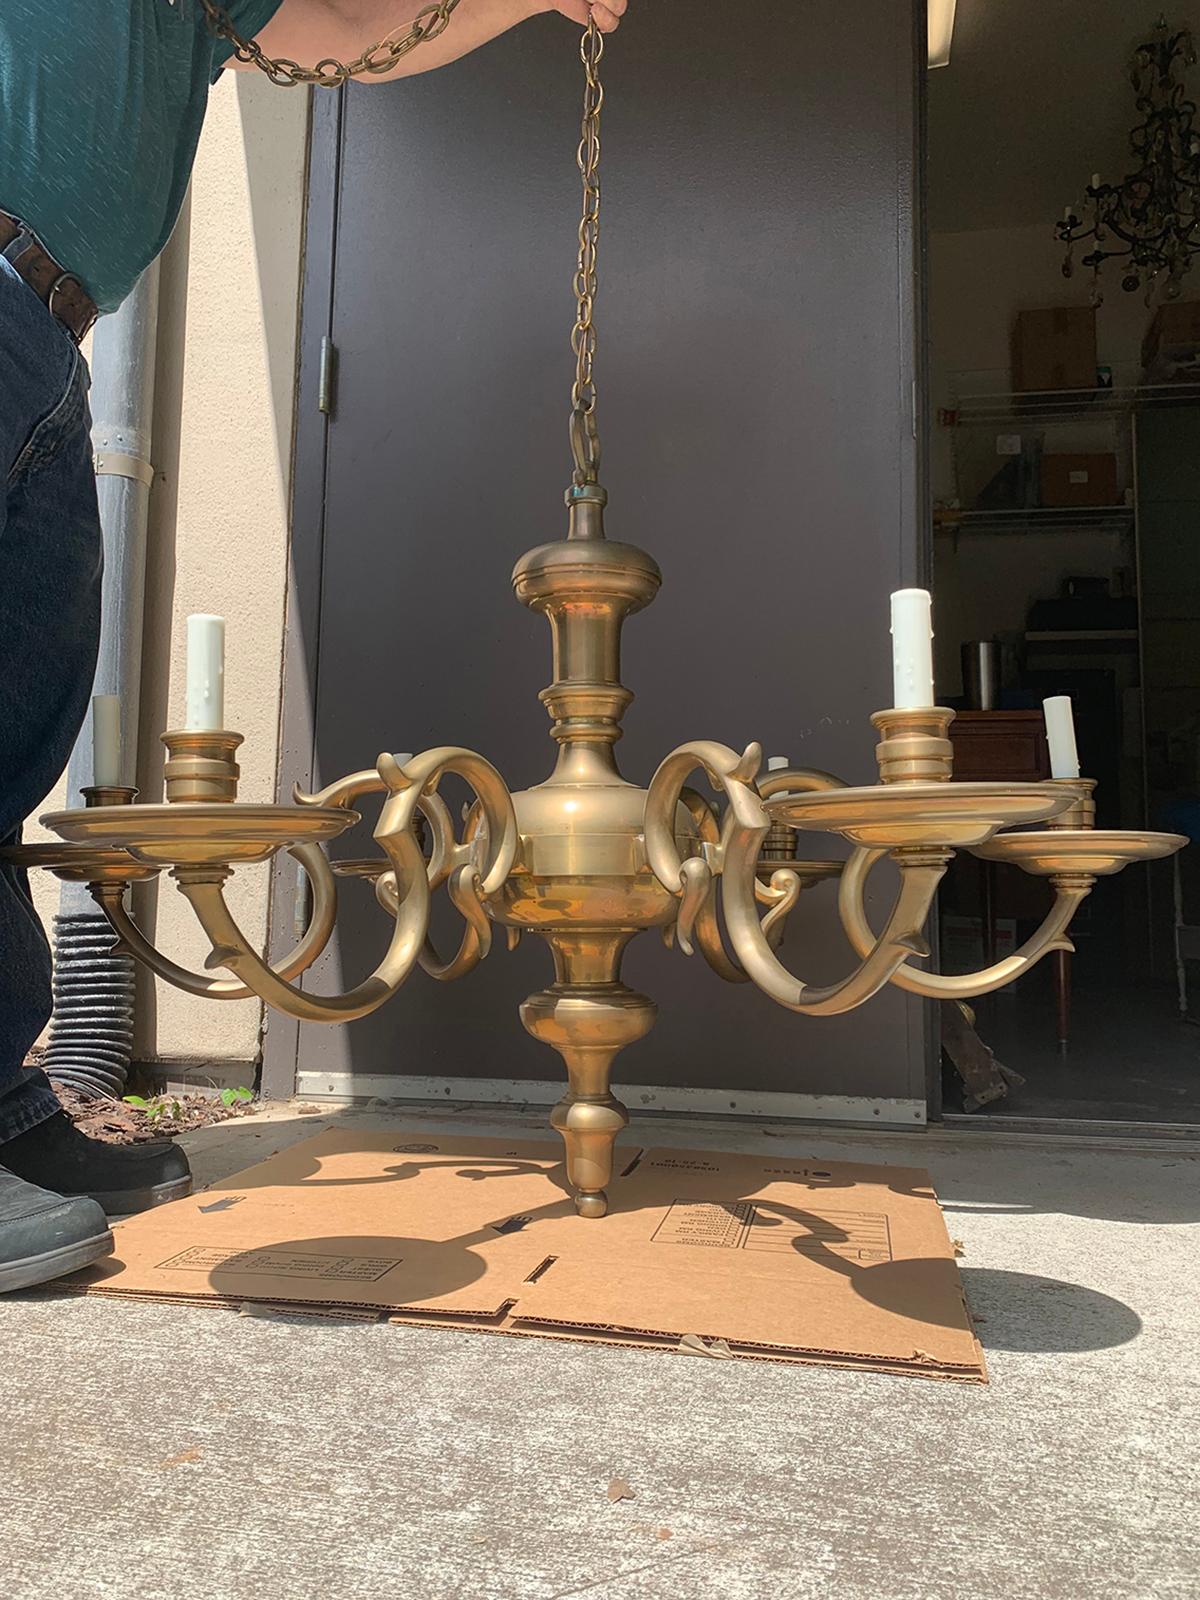 Large chapman solid brass six-arm chandelier, circa 1970s
Brand new wiring.